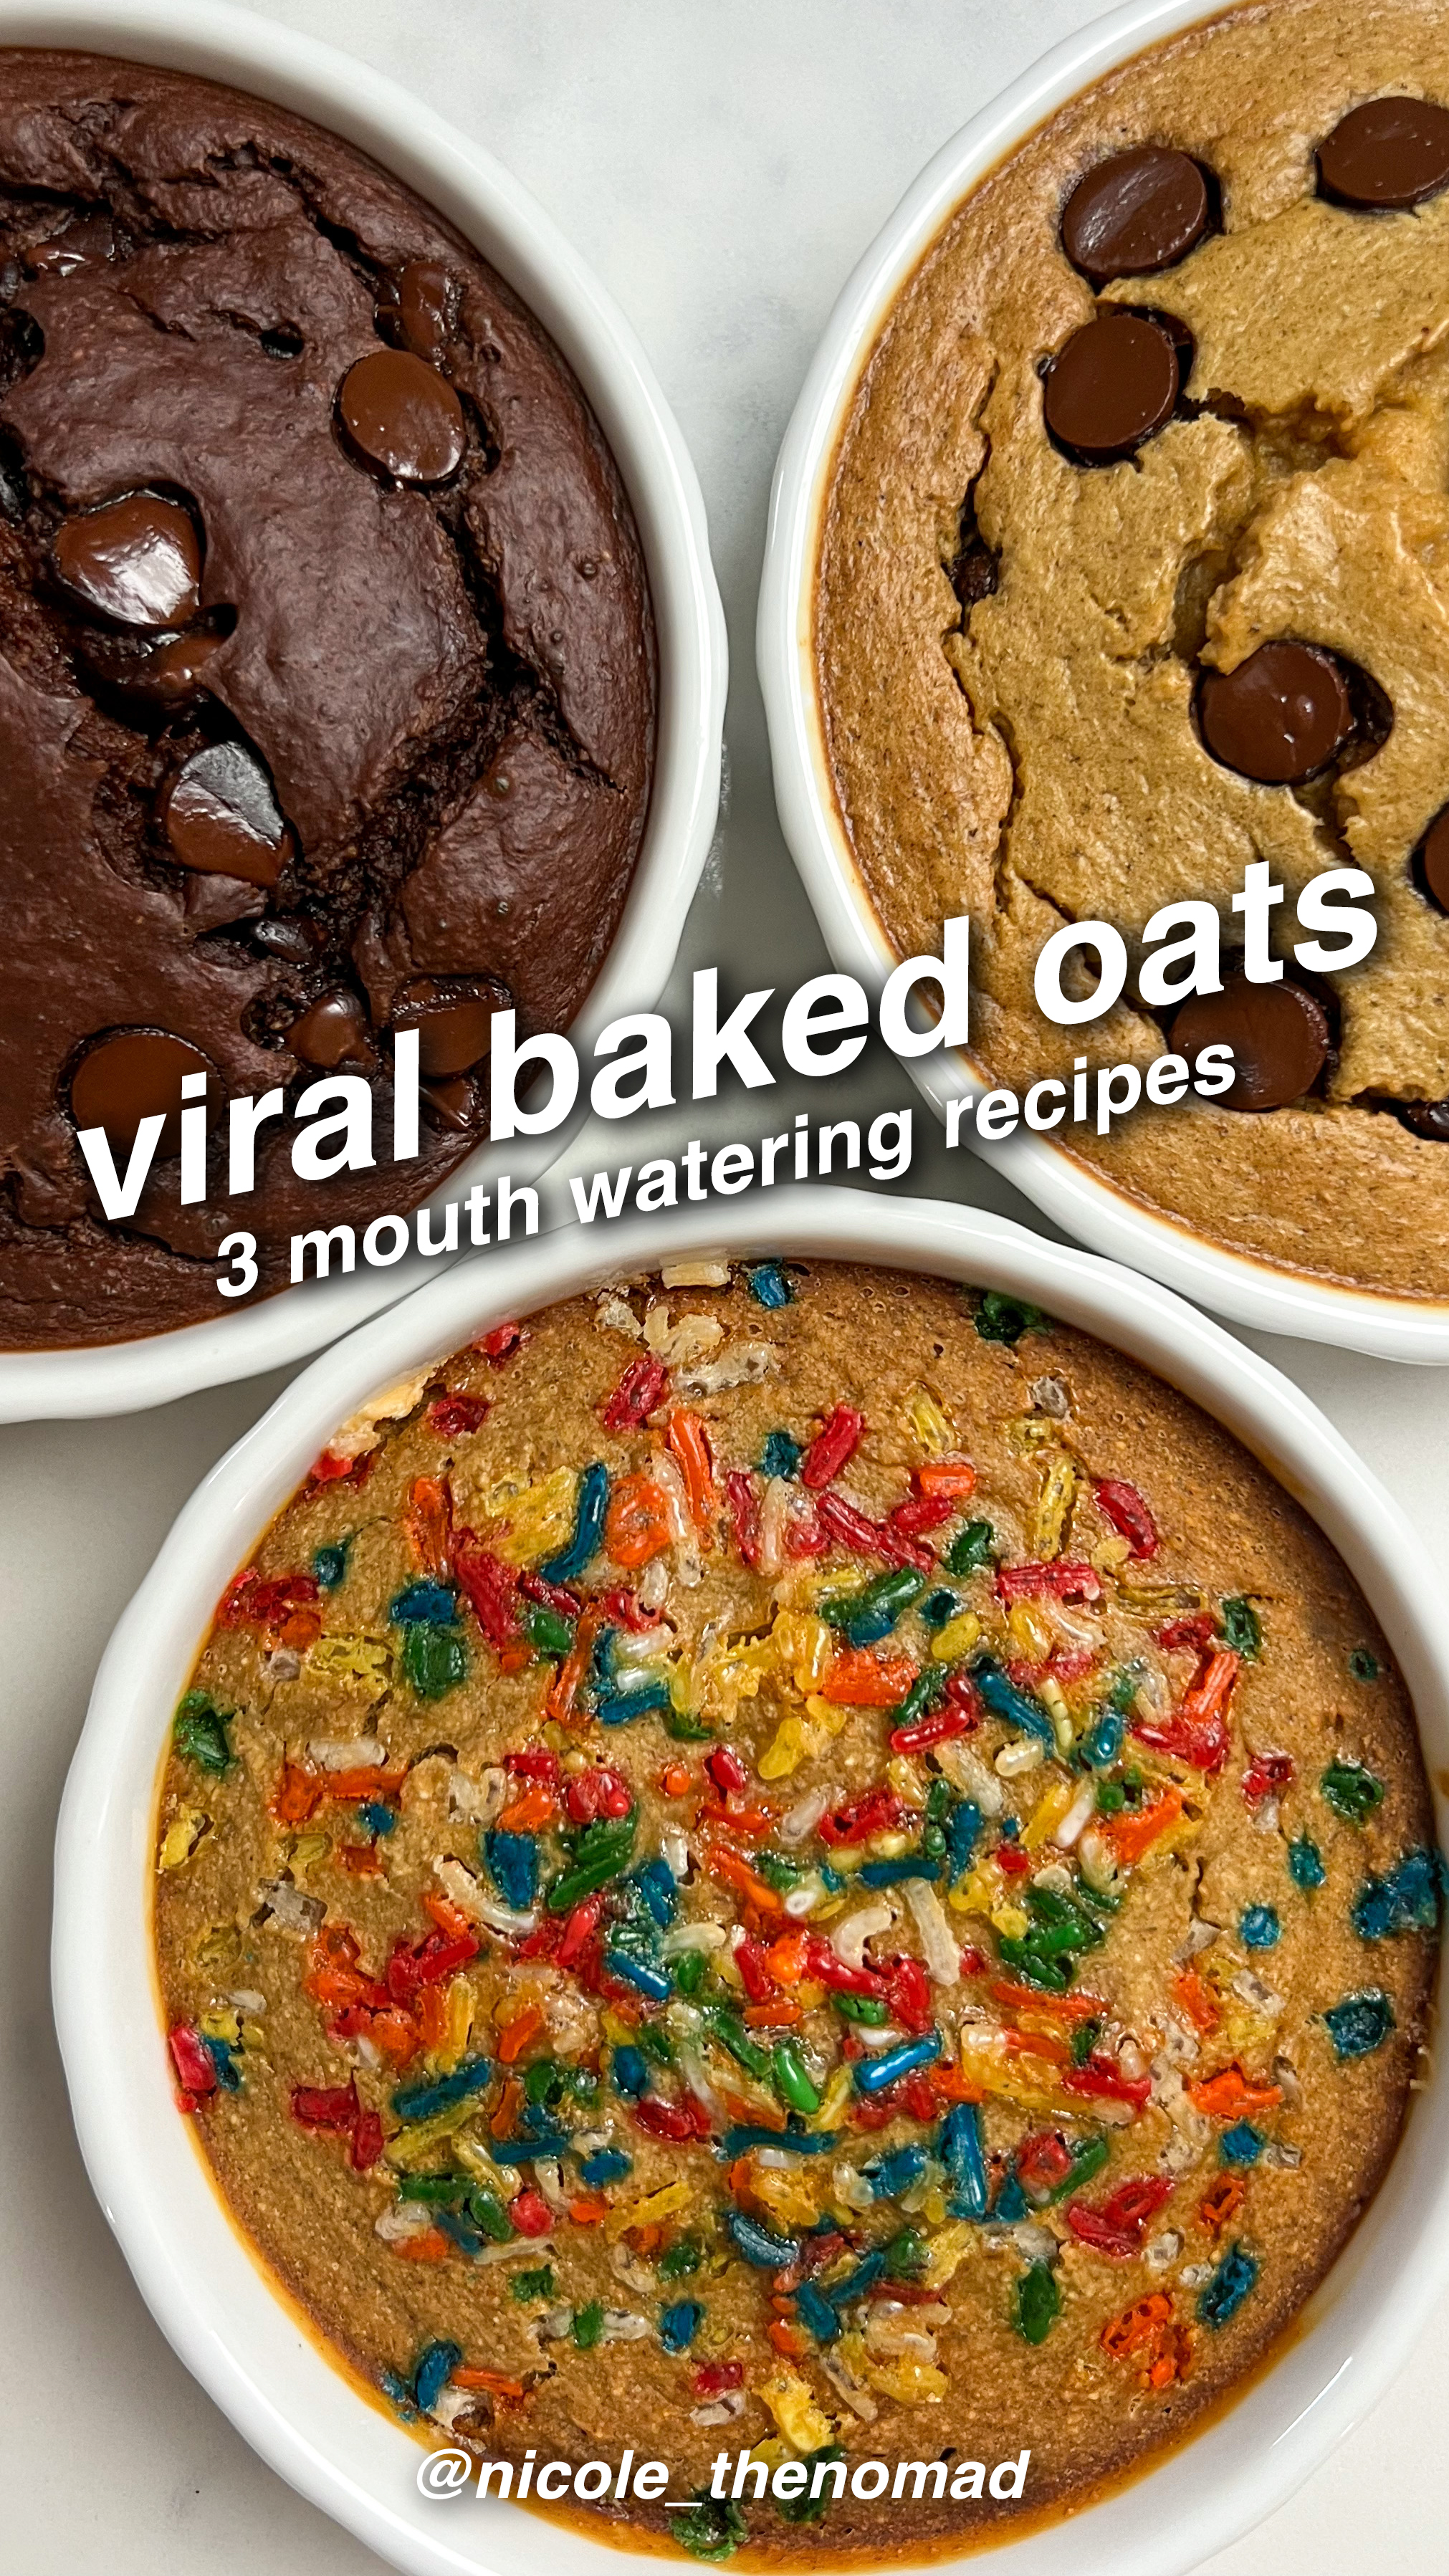 3 Viral Baked Oats Recipes for Breakfast